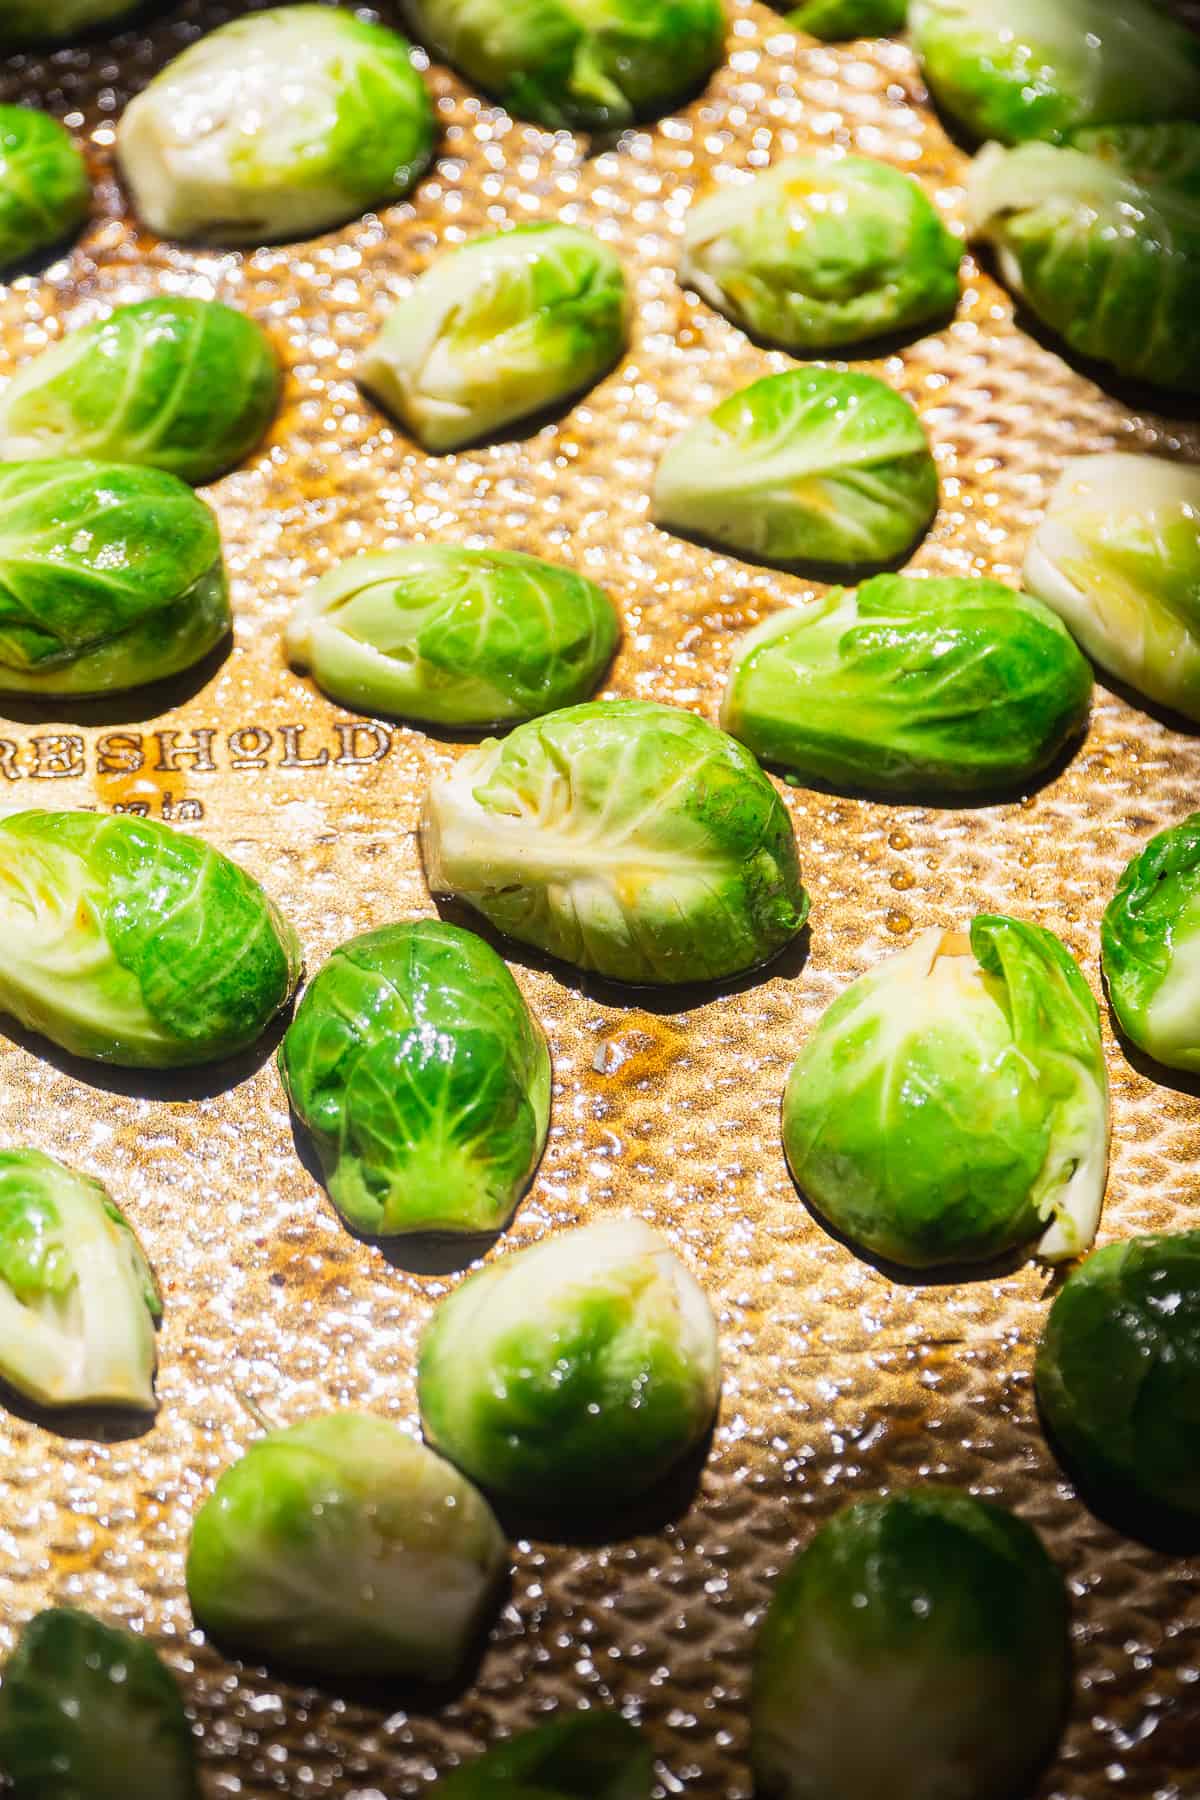 Brussel sprouts cut into halves on a baking sheet.